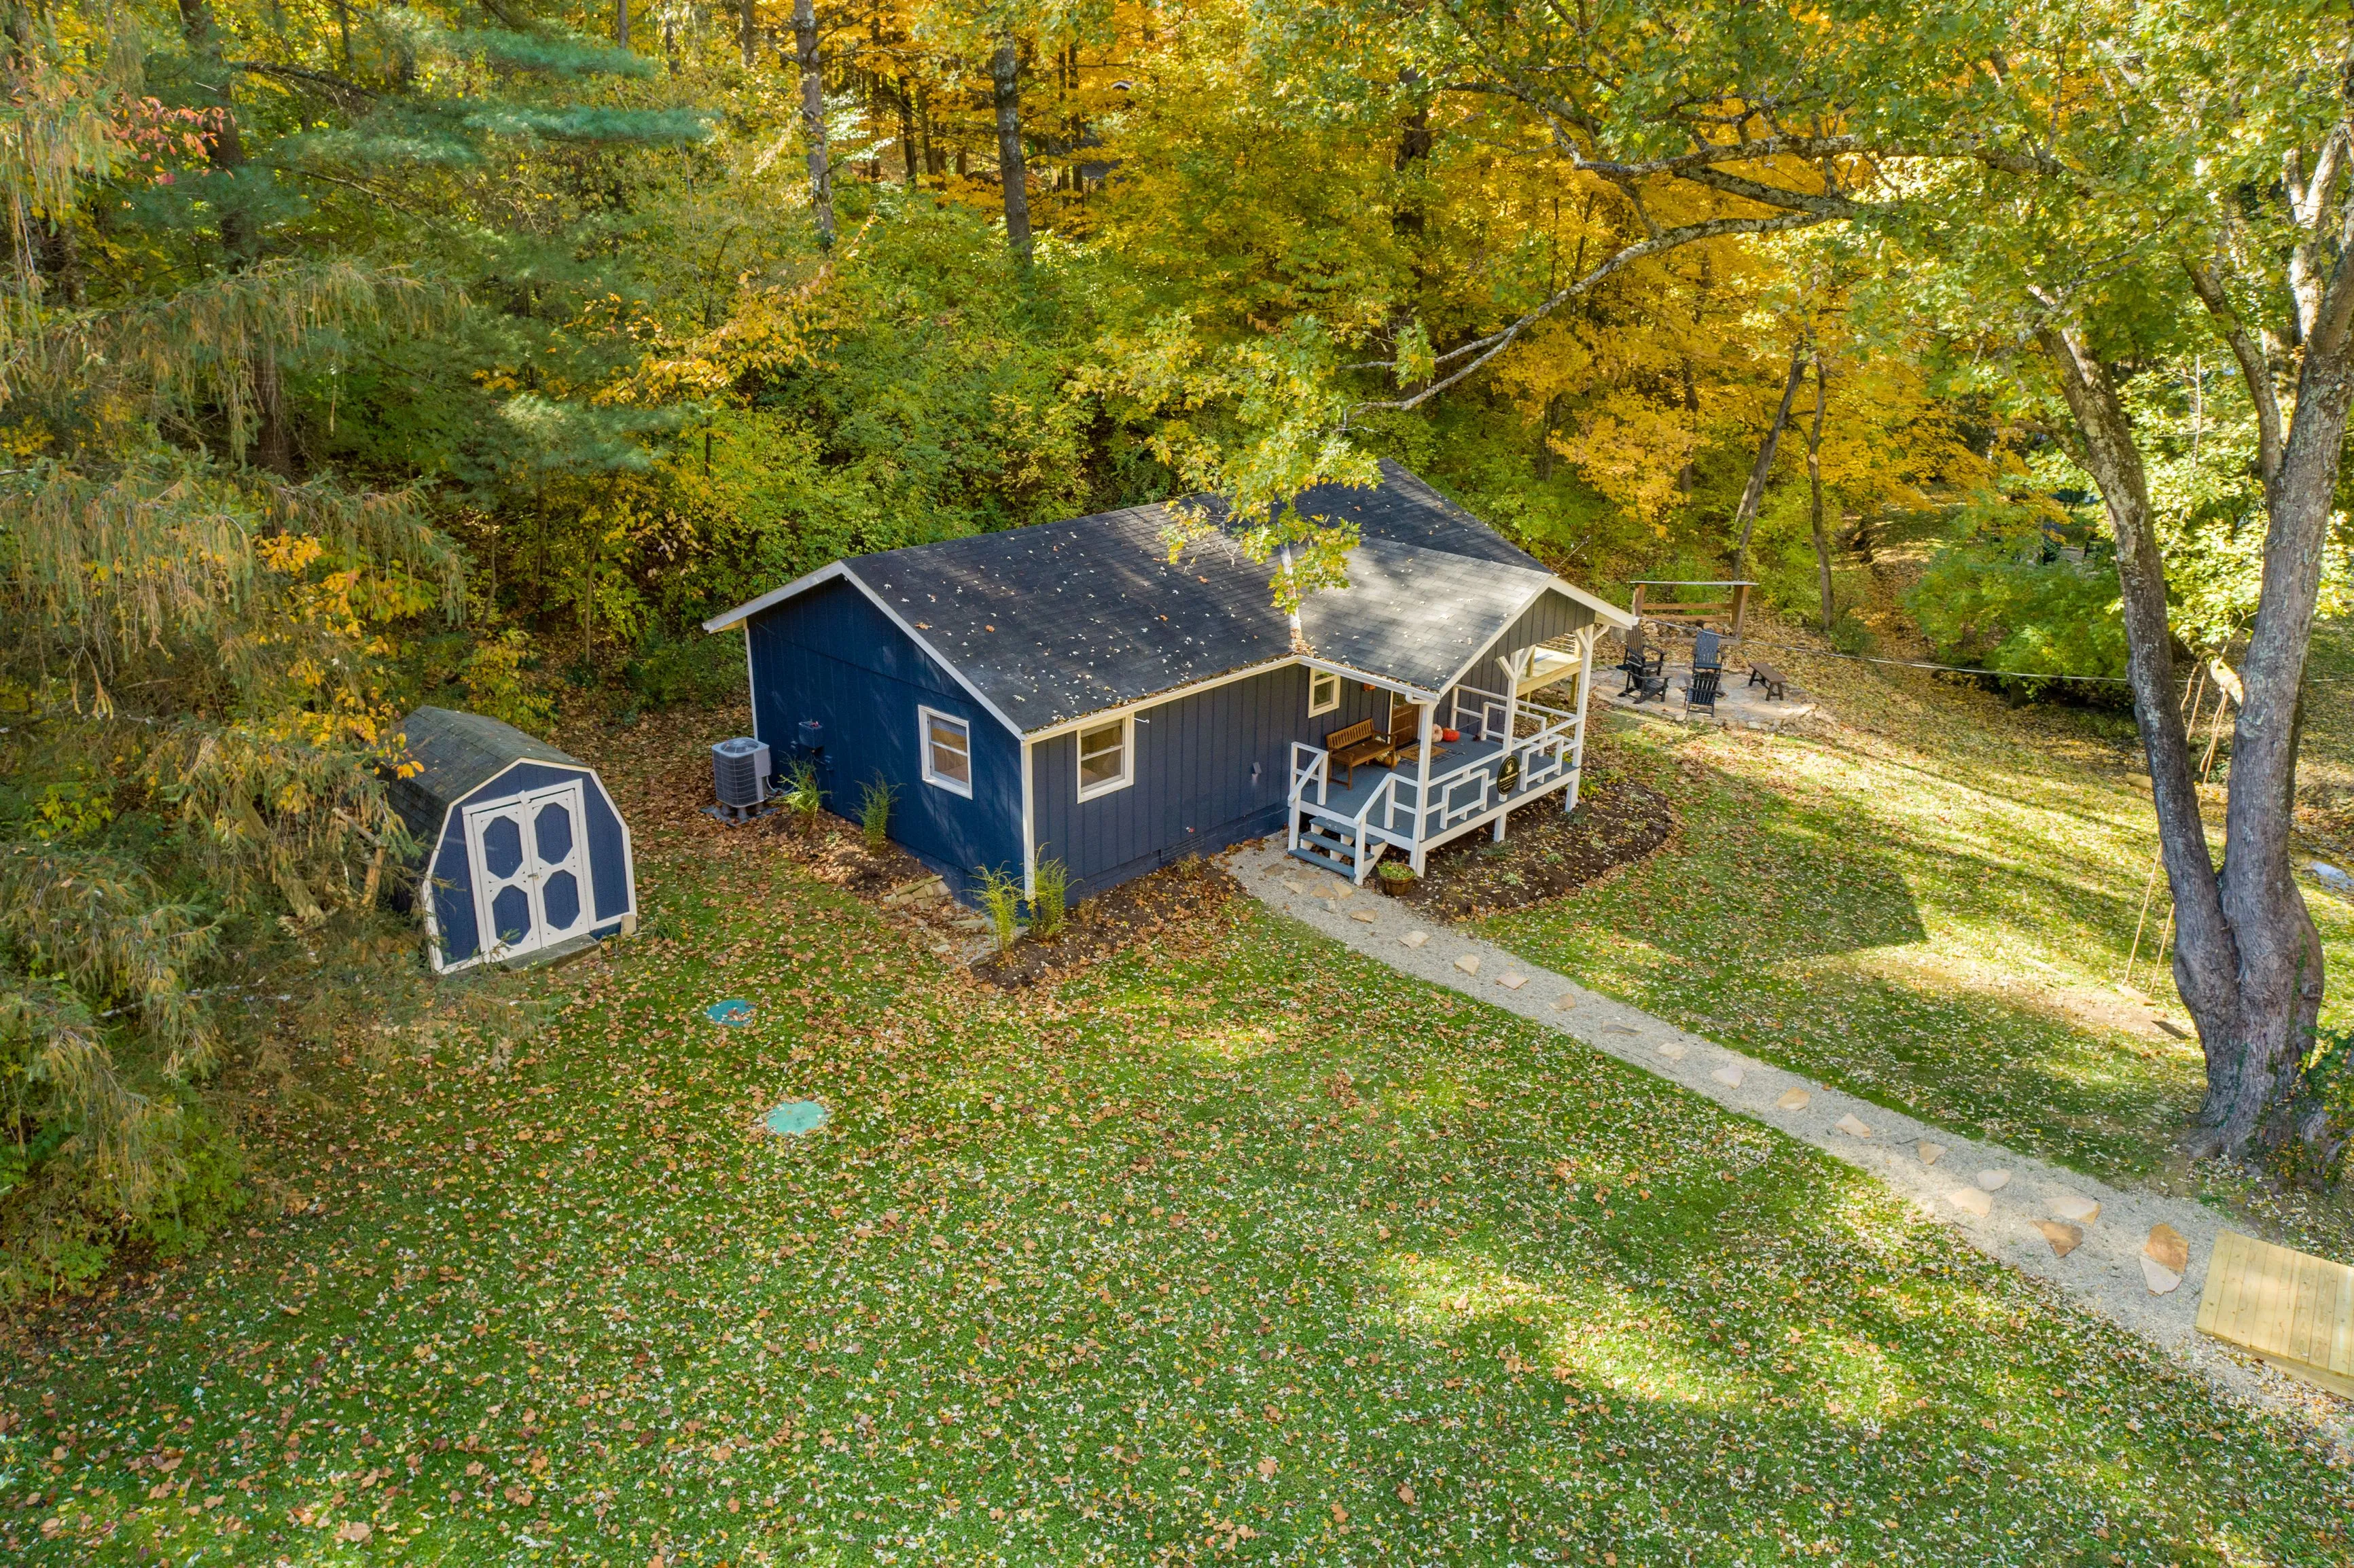 Aerial view of a small blue house with a white-trimmed porch surrounded by autumnal trees with a garden shed and fire pit in the yard.